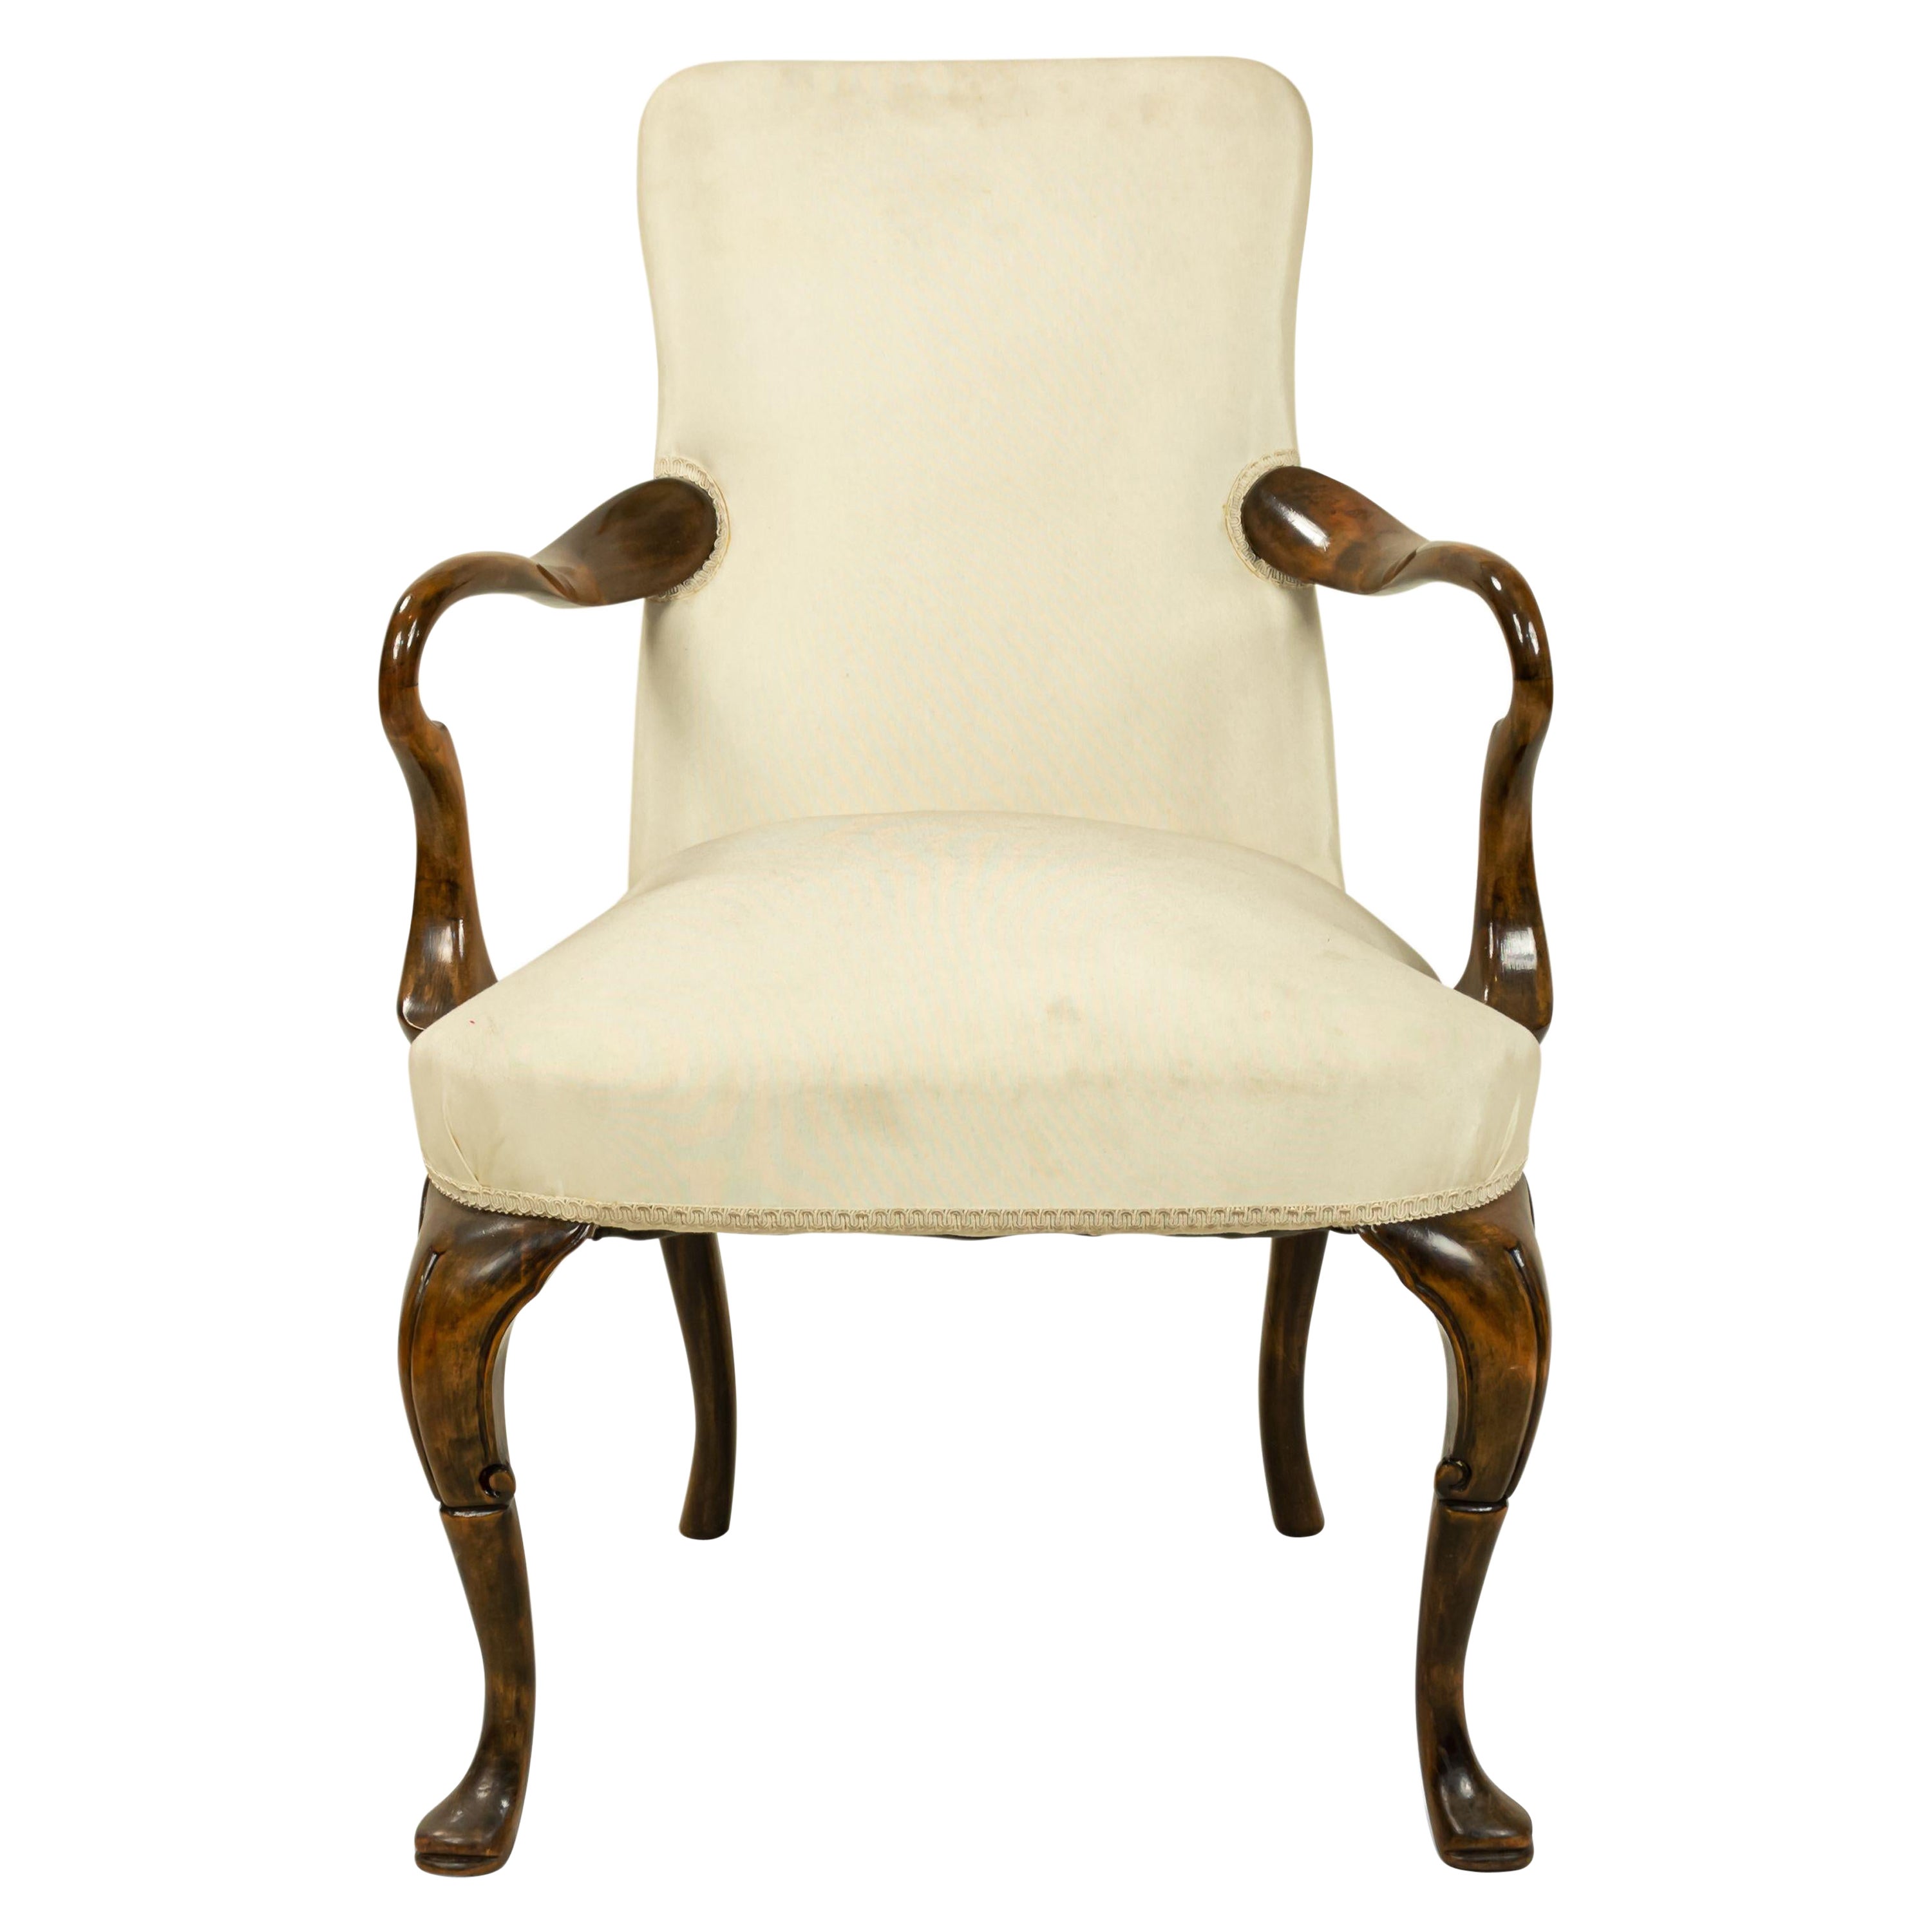 Queen Anne White Upholstered Walnut Arm Chair For Sale